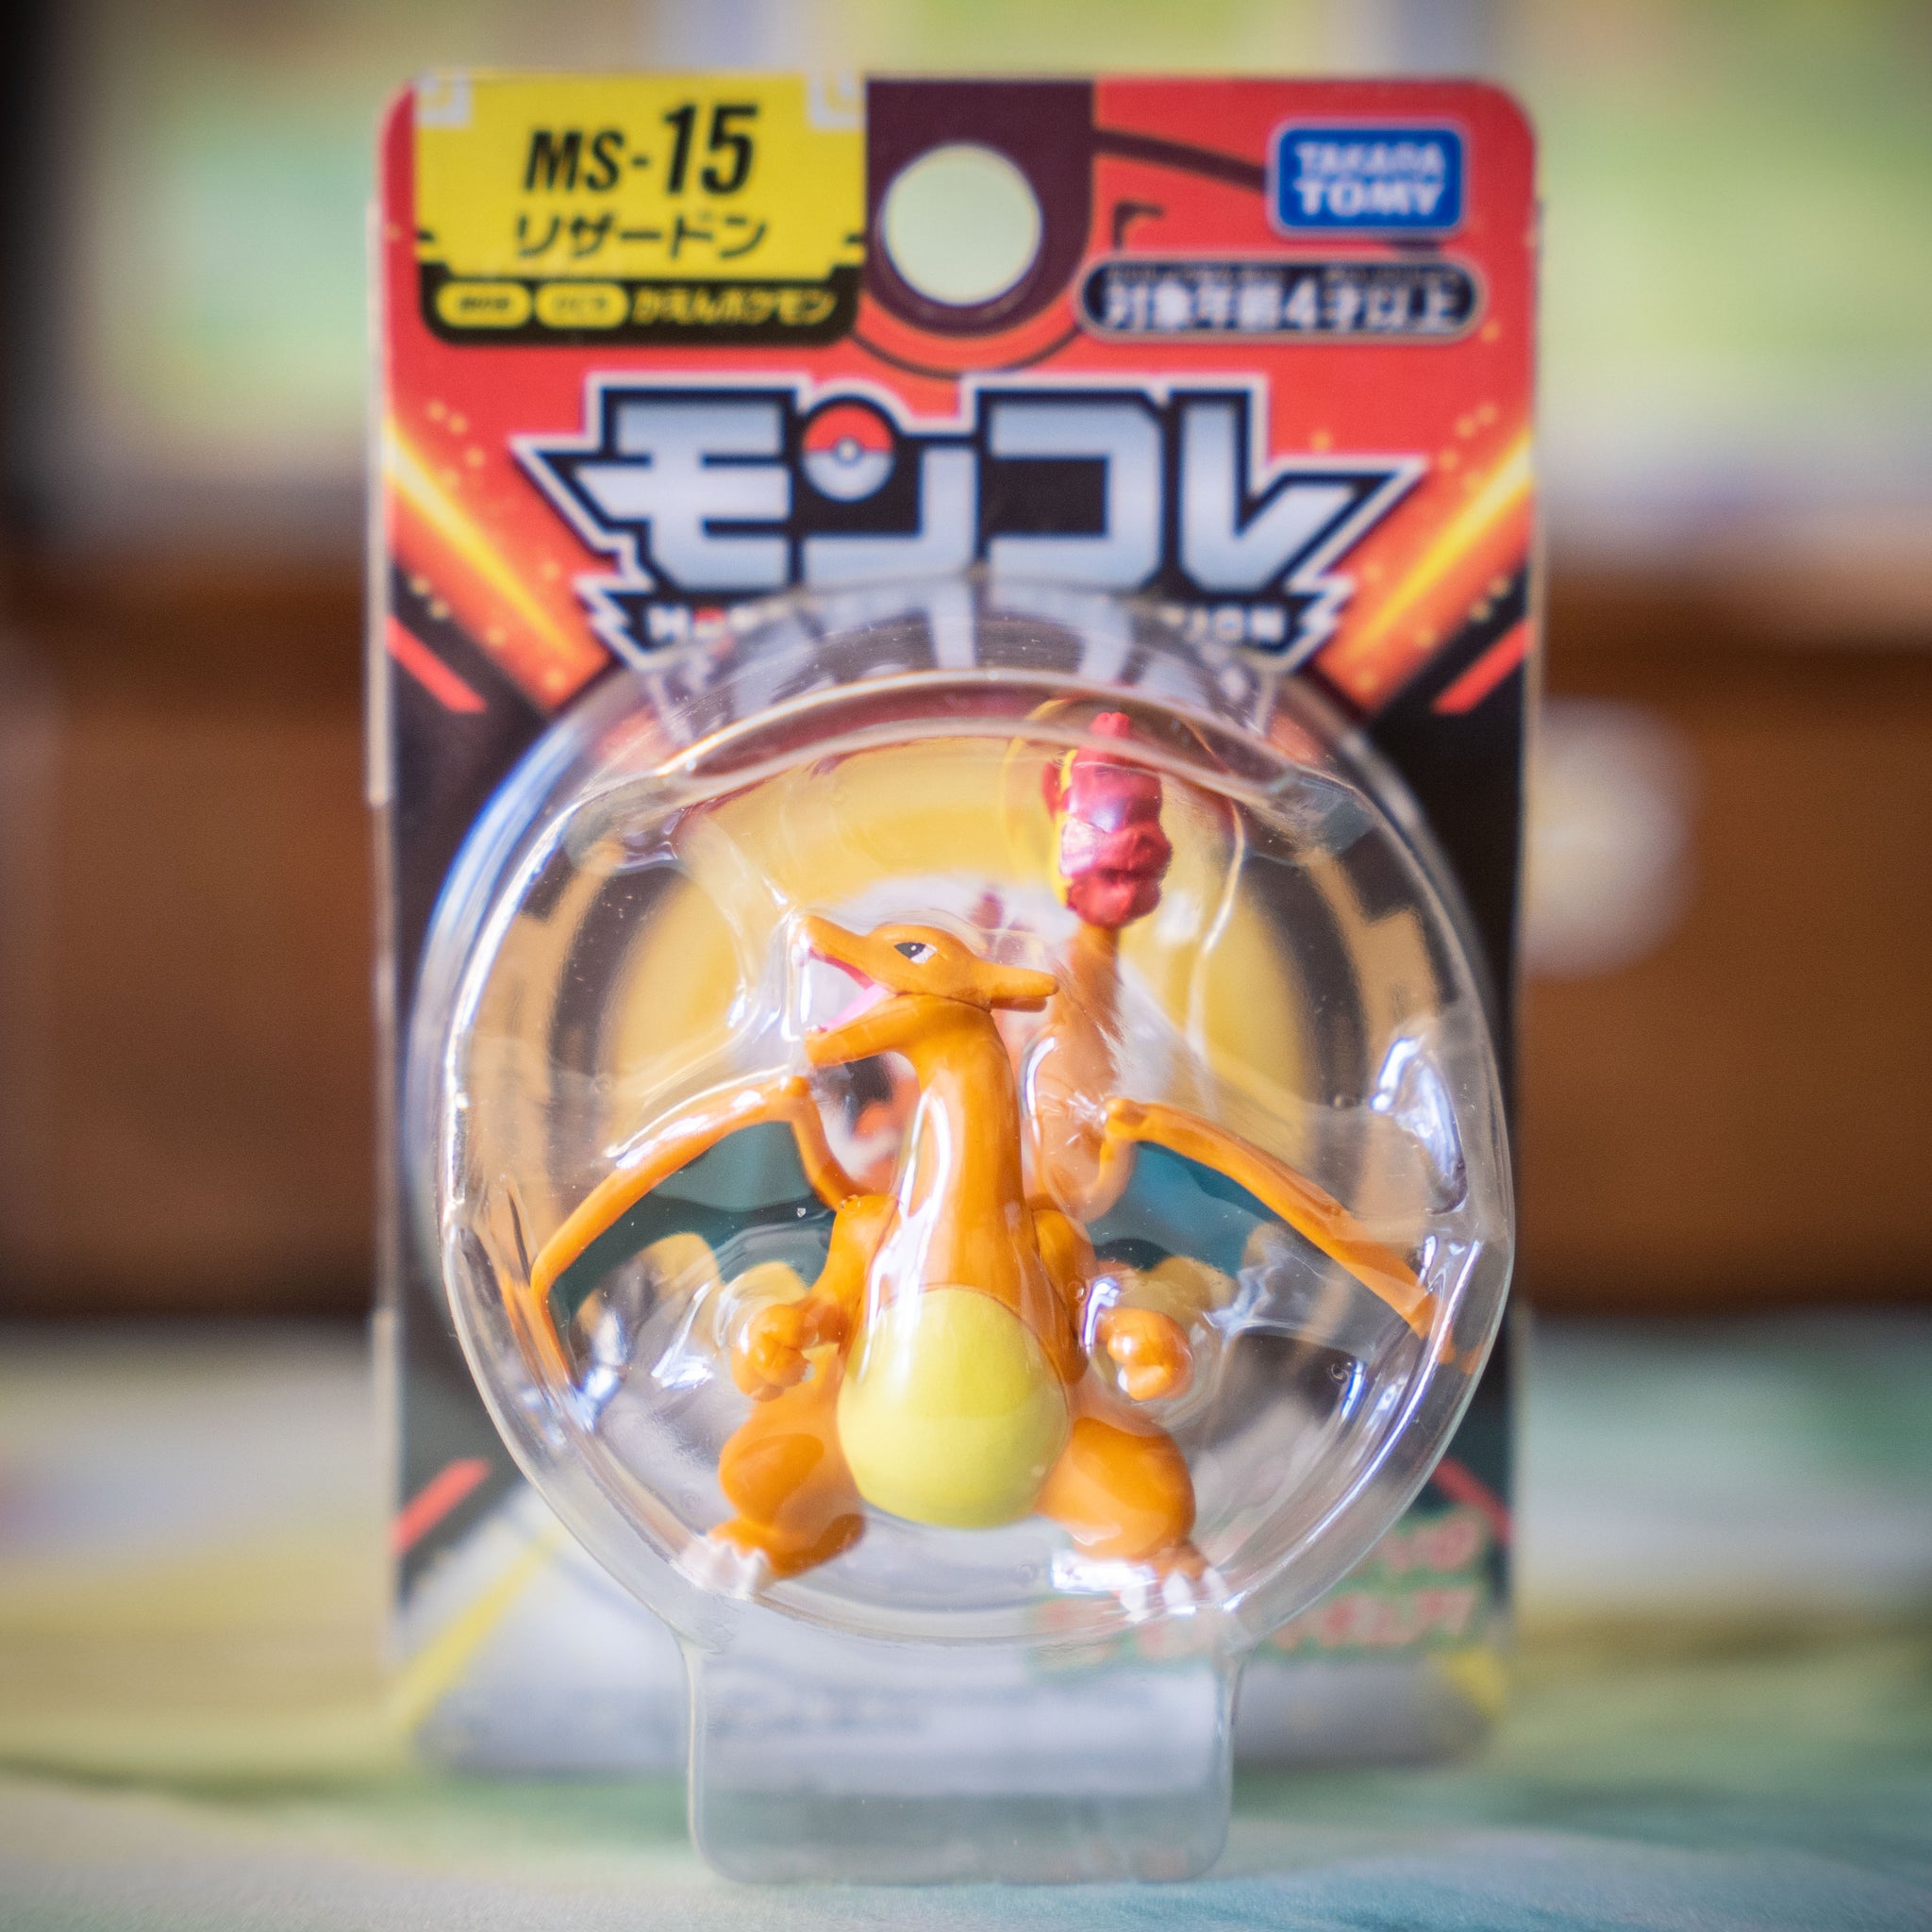 Charizard Figur (MS-15, Pokemon Tomy Monster Collection)